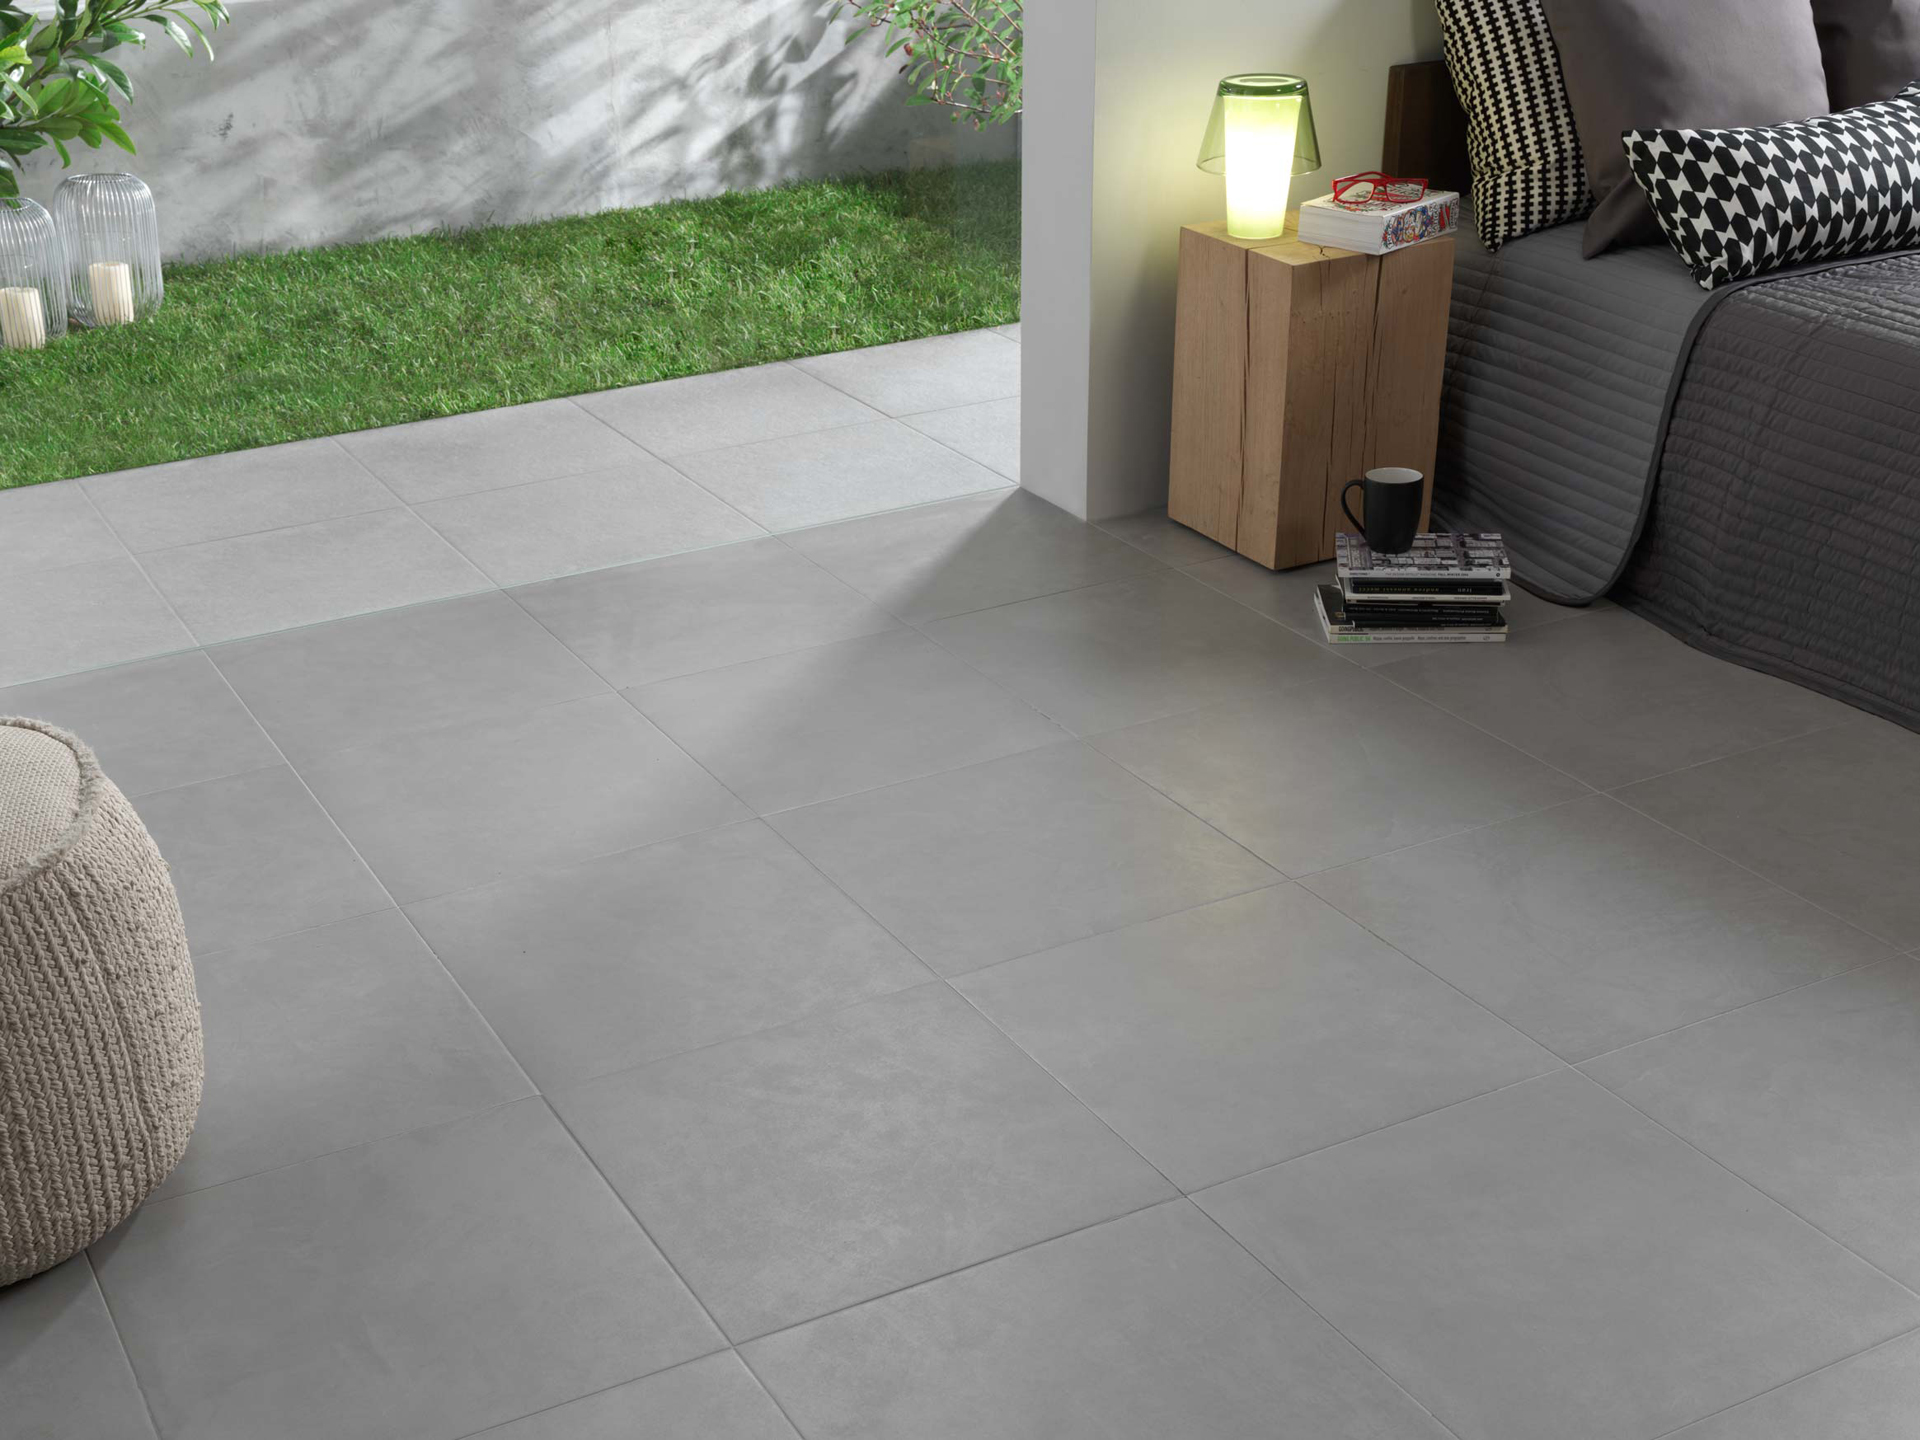 Top 10 Flooring Trends For 2020 Tile Terrazzo And Beyond